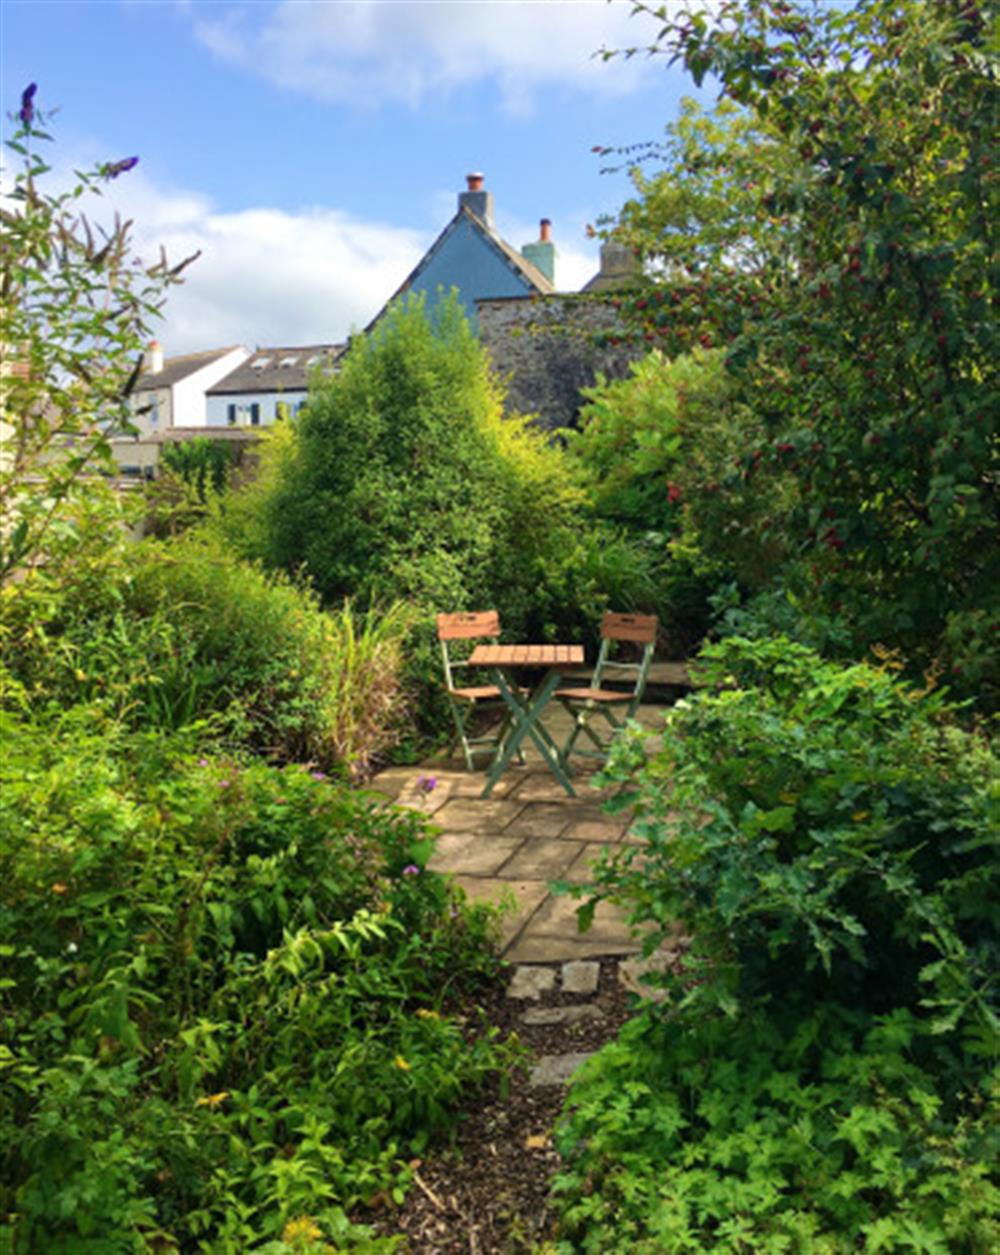 There are various seating areas within the large garden. at 10 Castle Street in Totnes